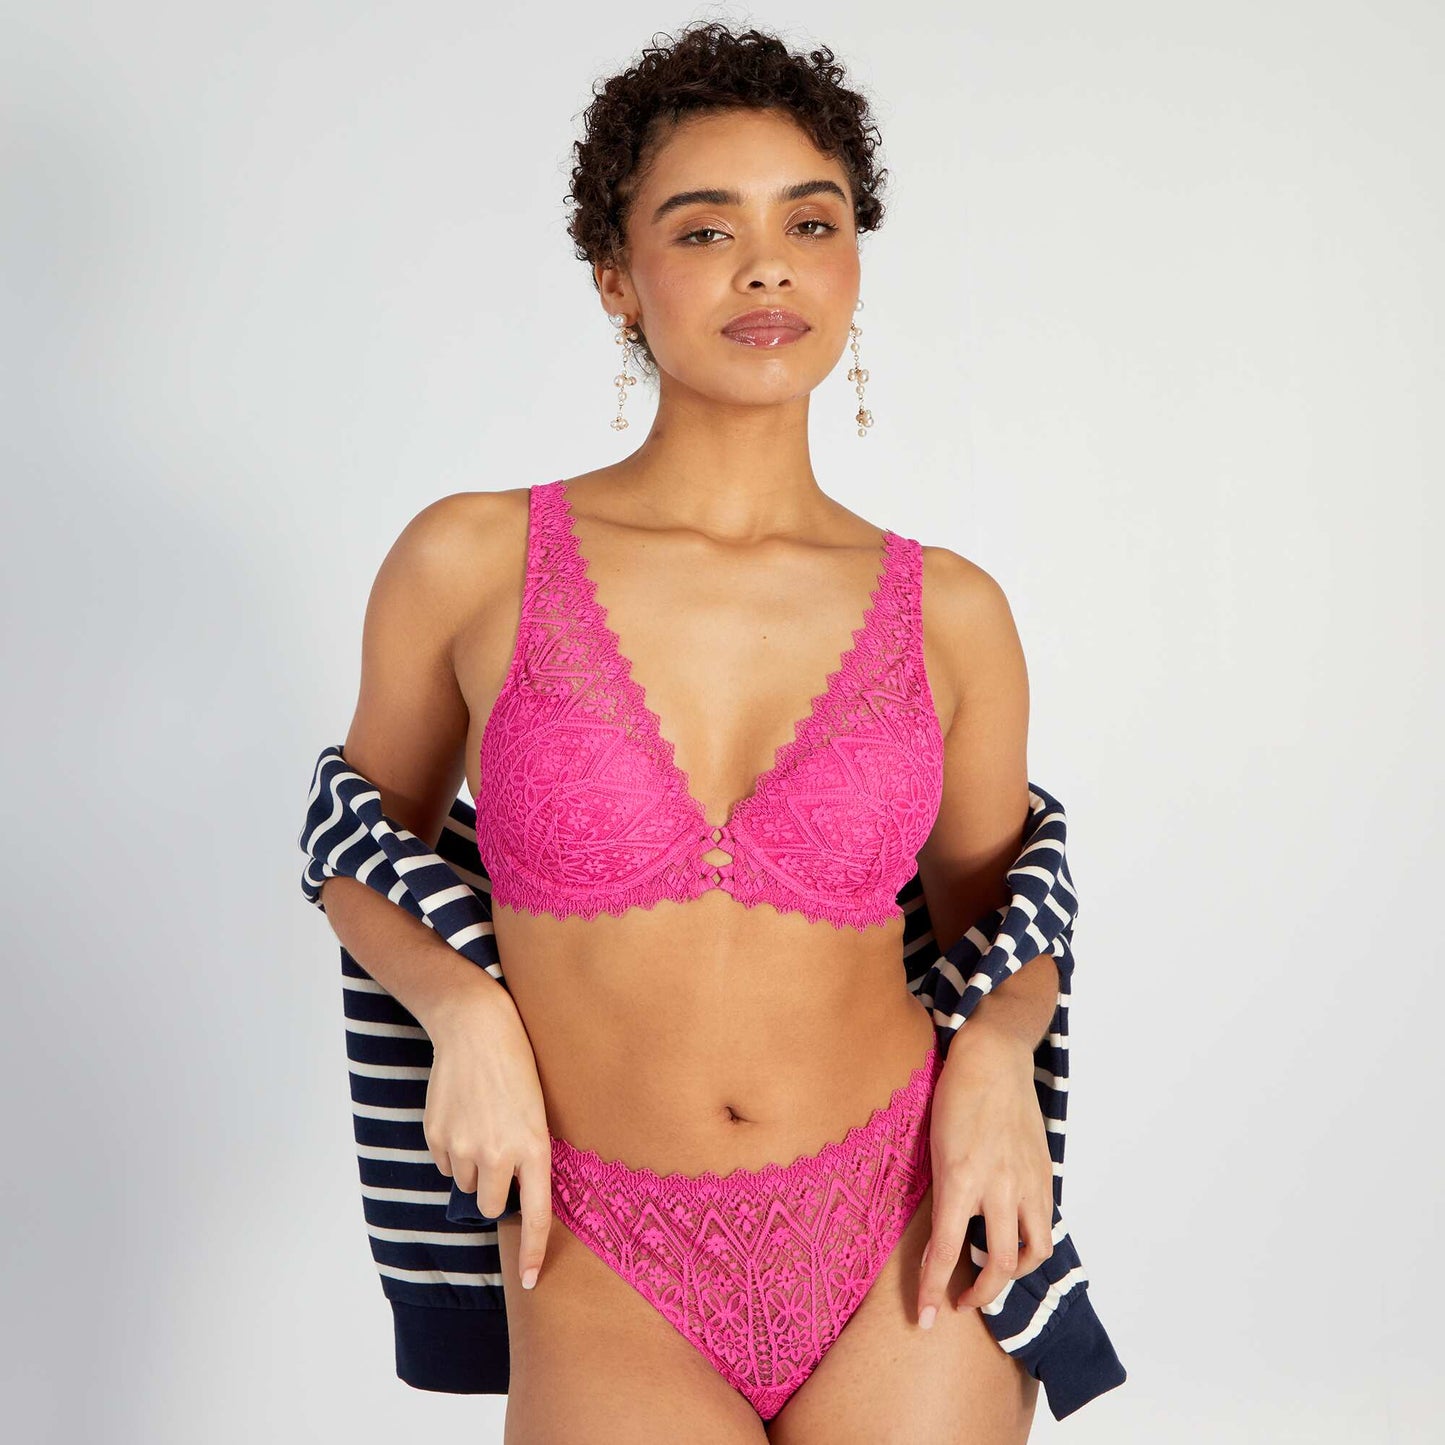 Lace thong with openwork detail on the back PINK BERRY